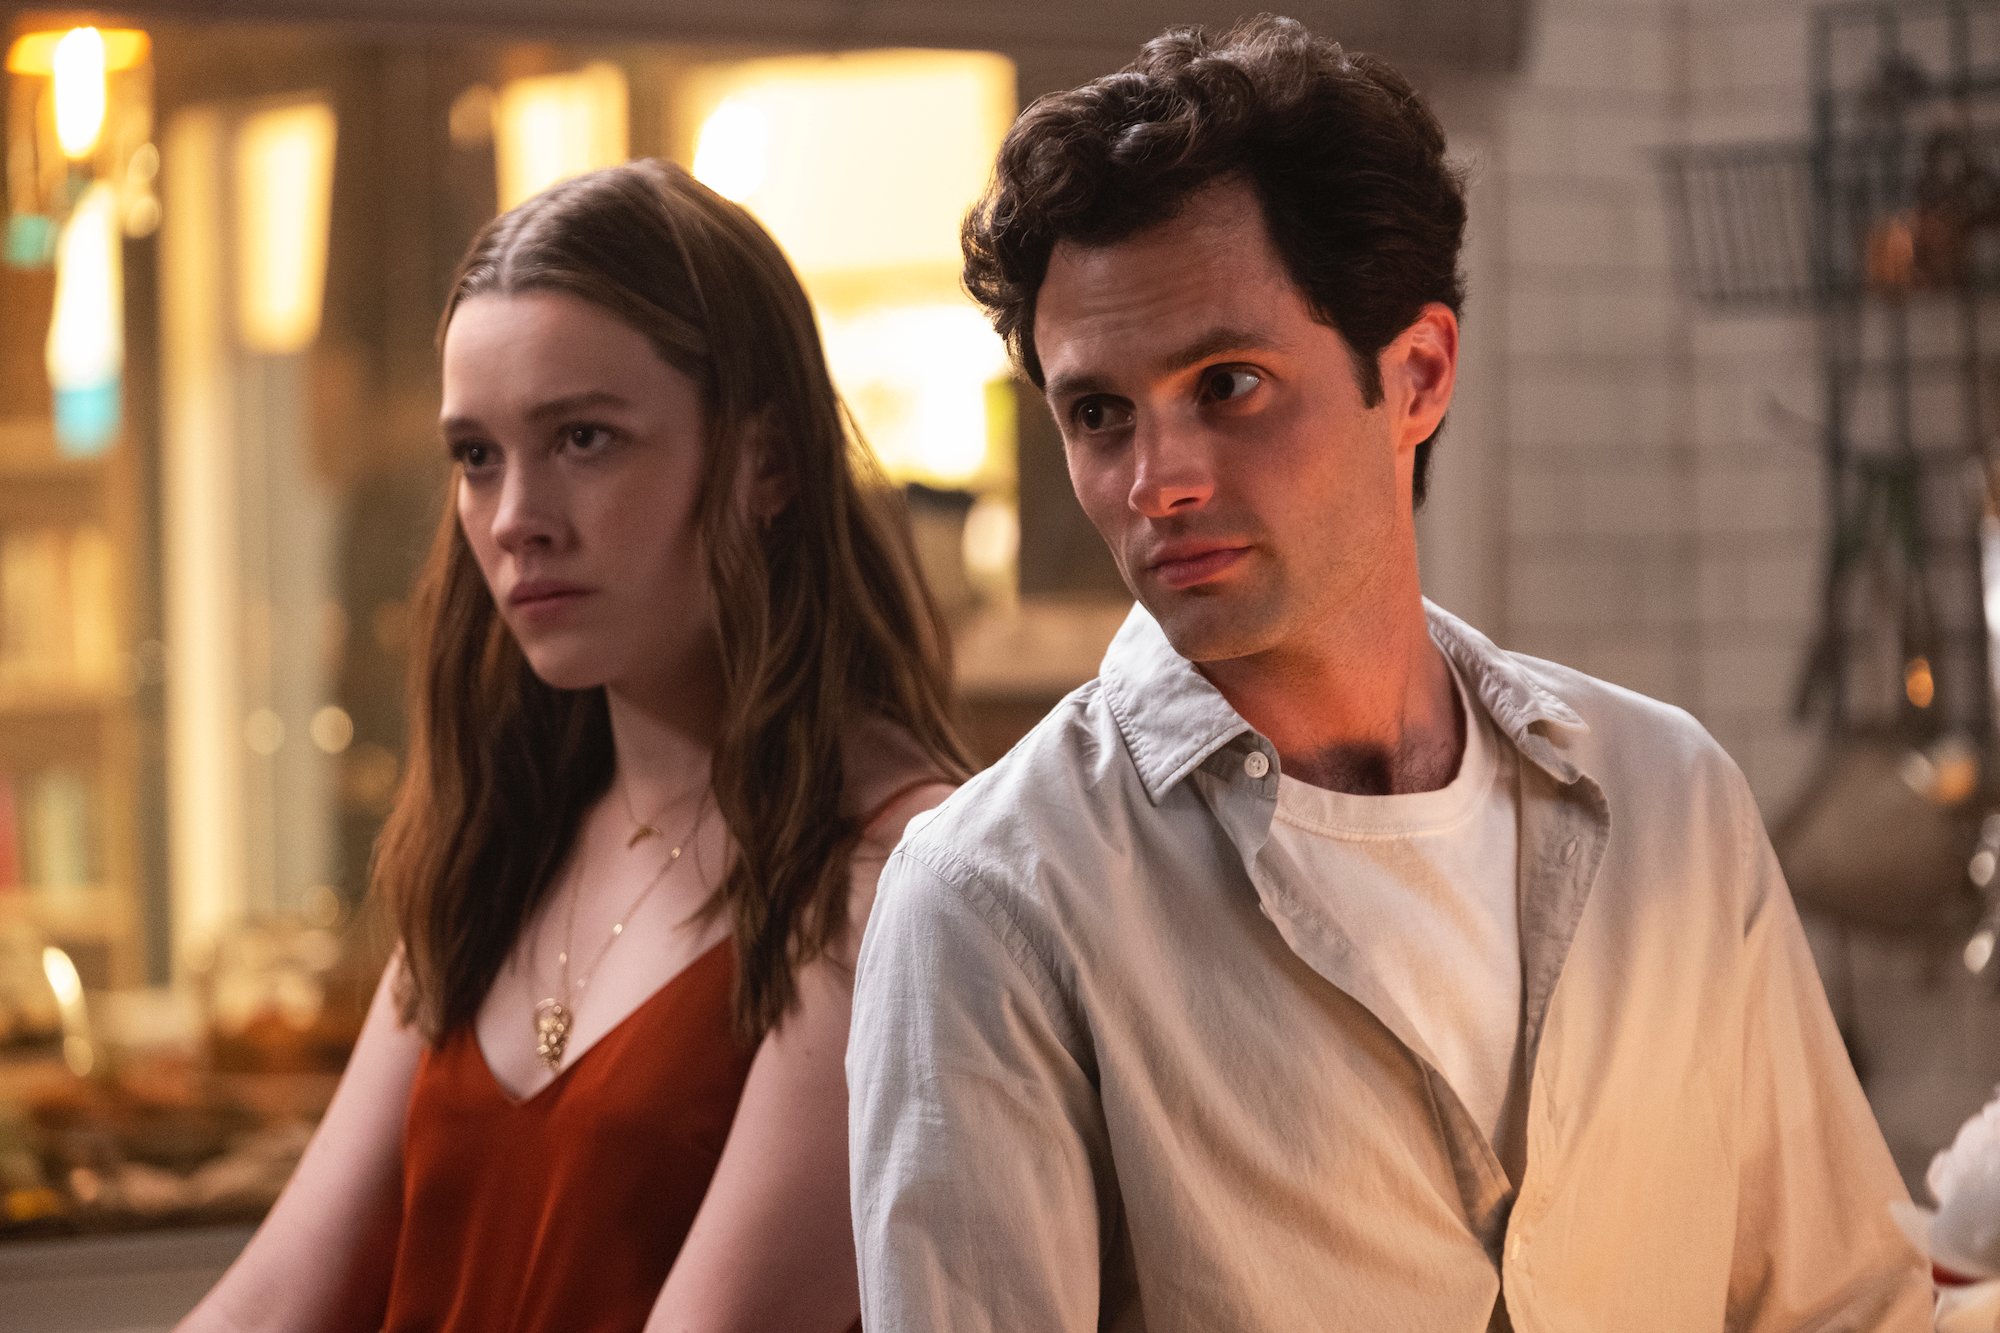 5 Love Quinn Theories for Season 3 of ‘You’ on Netflix That Will Make You Rewatch Season 2